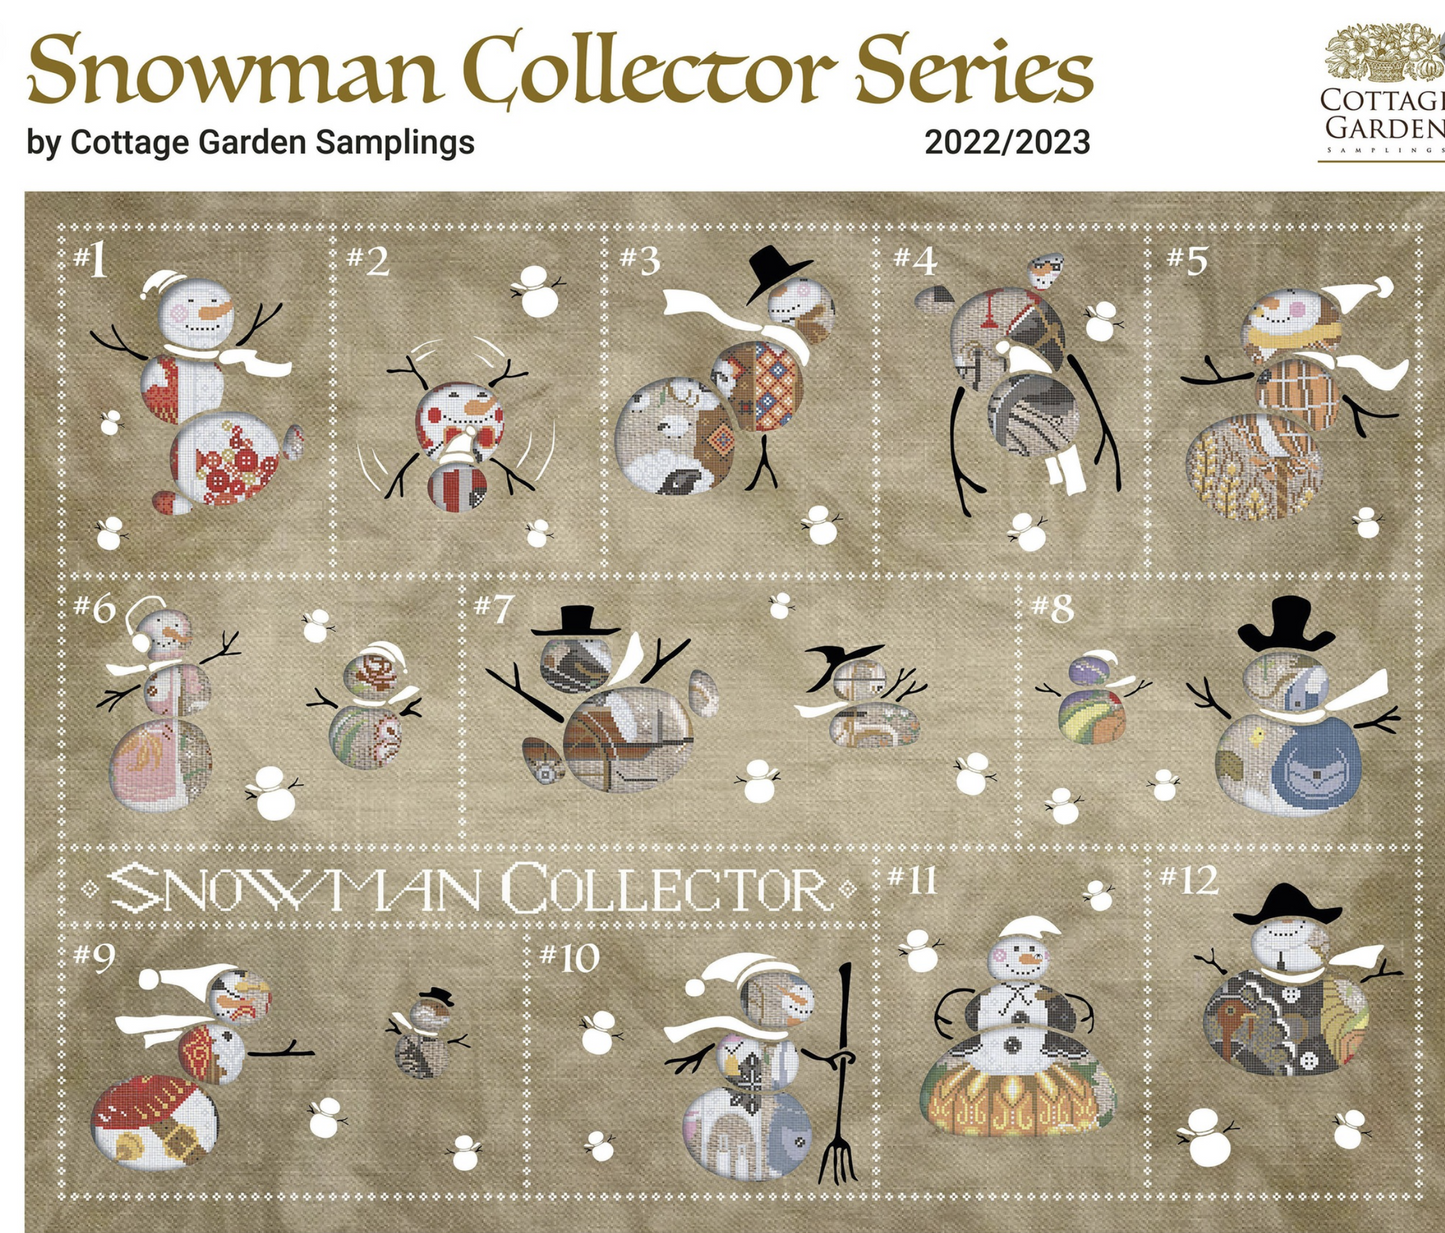 Snowman Collector #1 The Needleworker - Cross Stitch Pattern by Cottage Garden Samplings